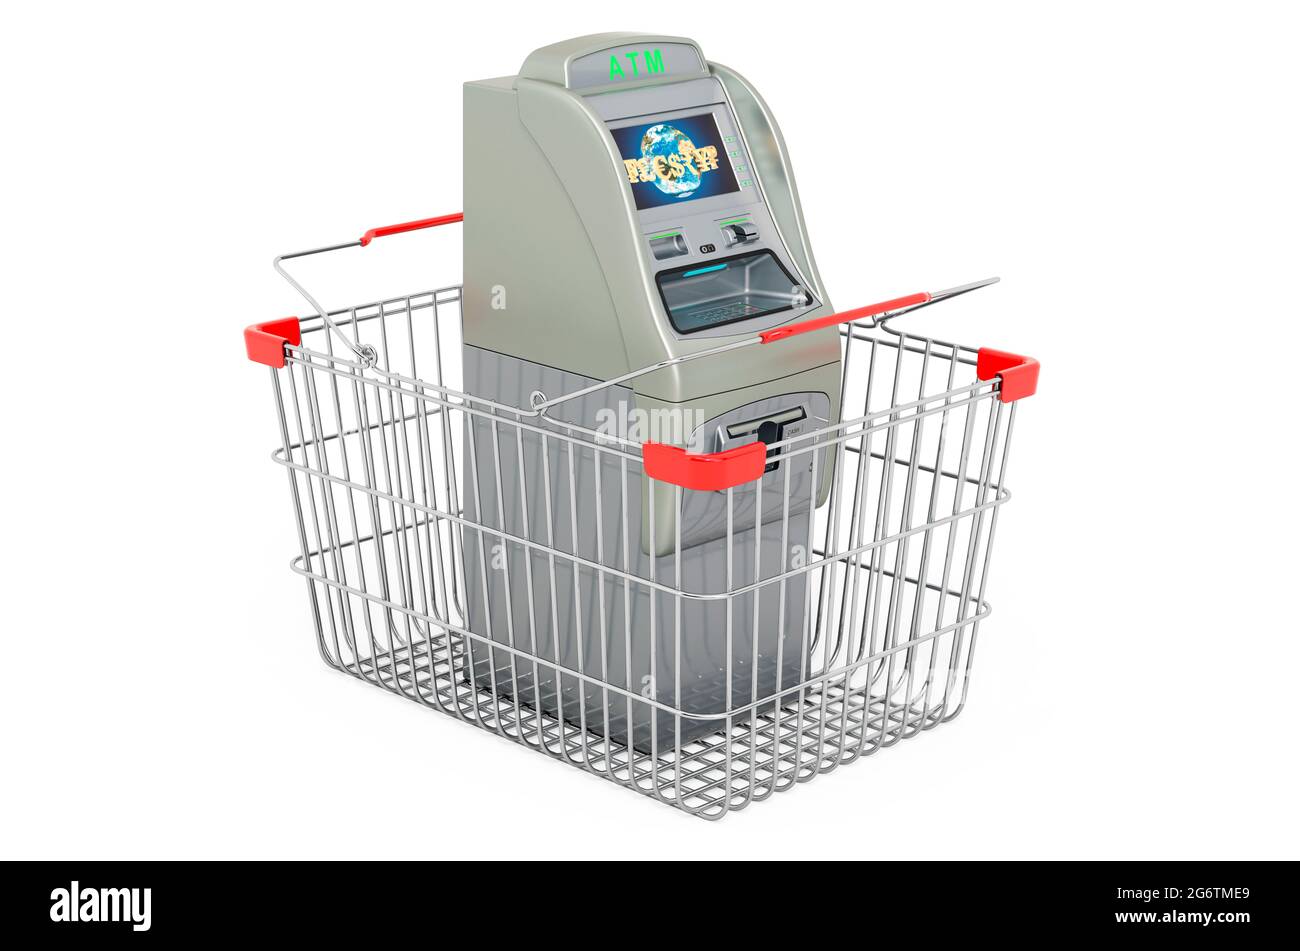 Shopping basket with ATM machine. 3D rendering isolated on white background Stock Photo